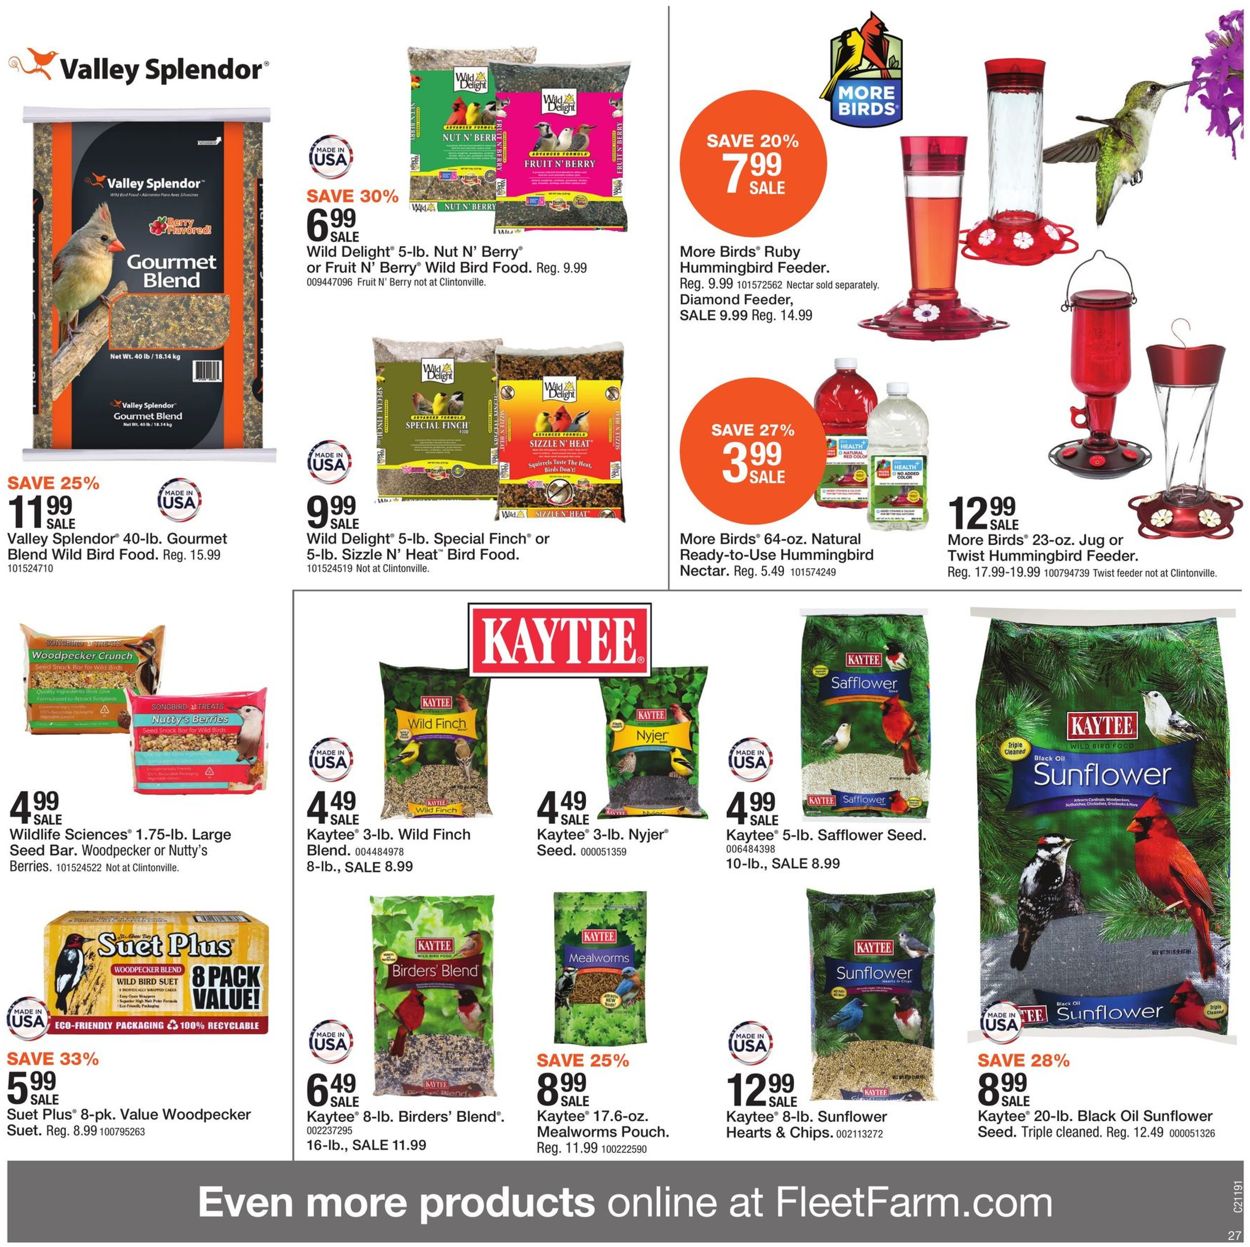 Mills Fleet Farm Current weekly ad 05/07 - 05/15/2021 [27] - frequent ...